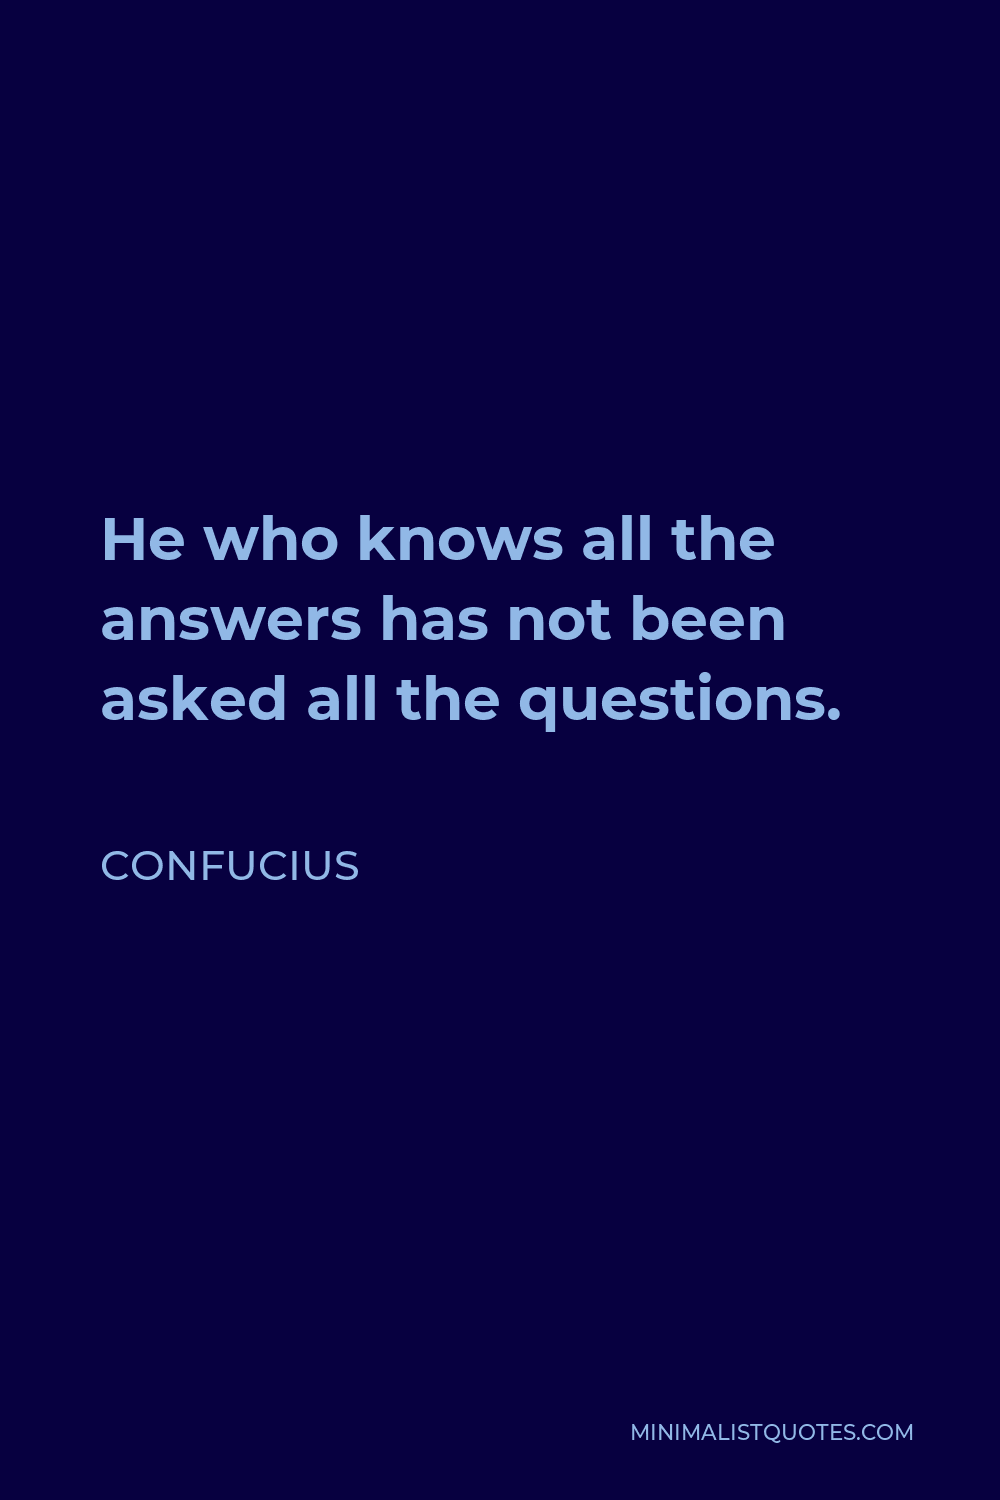 Confucius Quote - He who knows all the answers has not been asked all the questions.